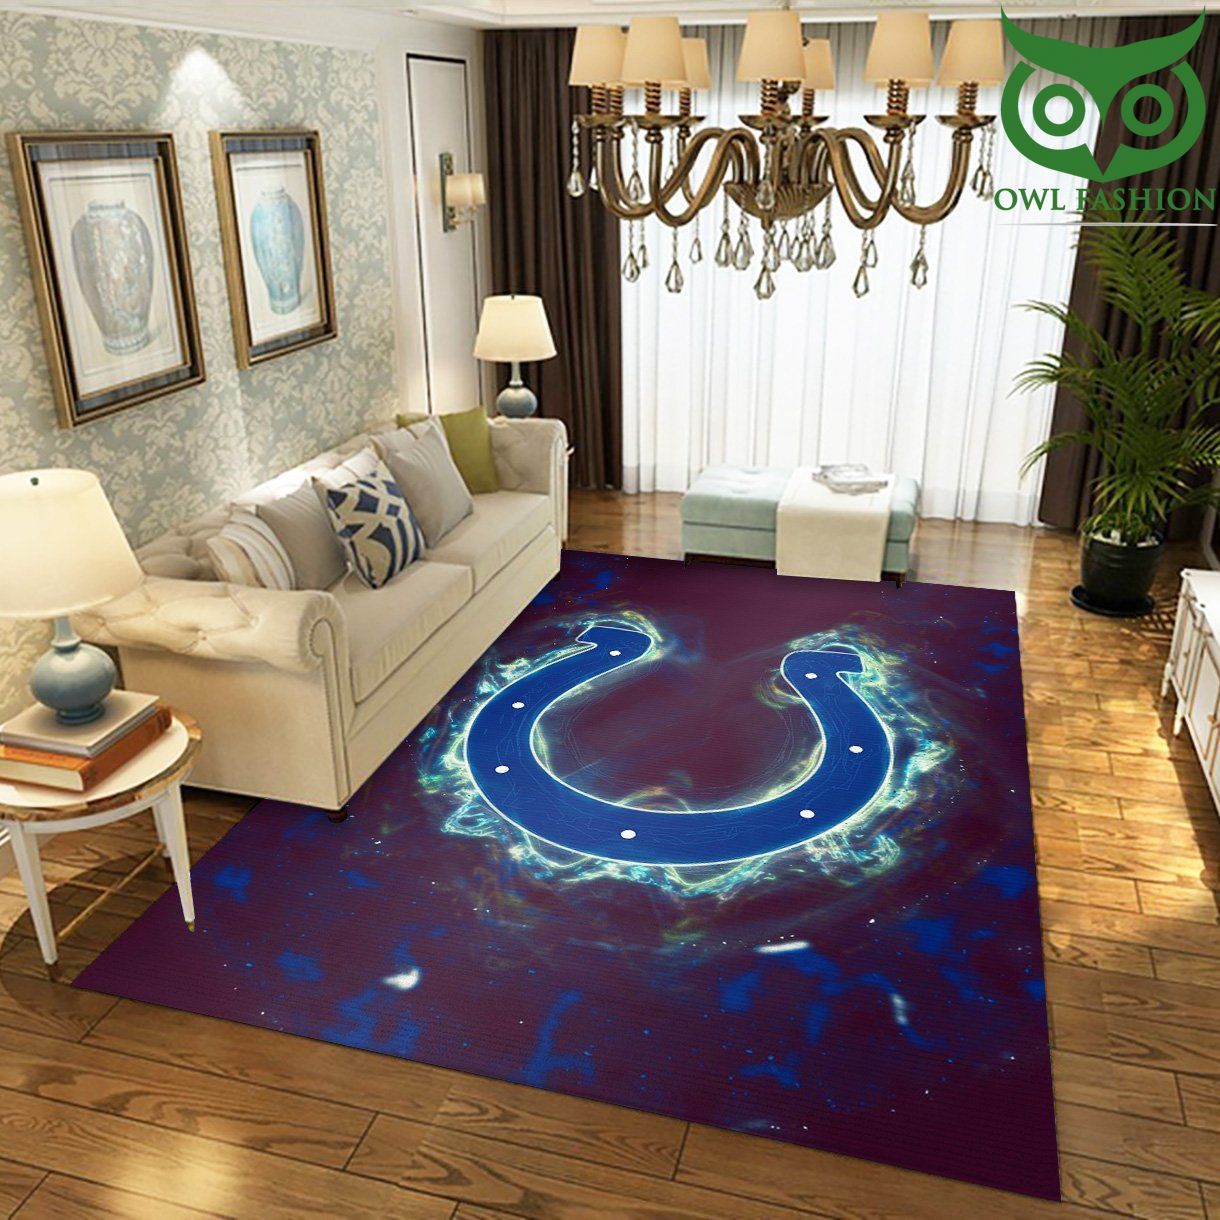 Indianapolis Colts Nfl Art carpet rug Home and floor Decoration